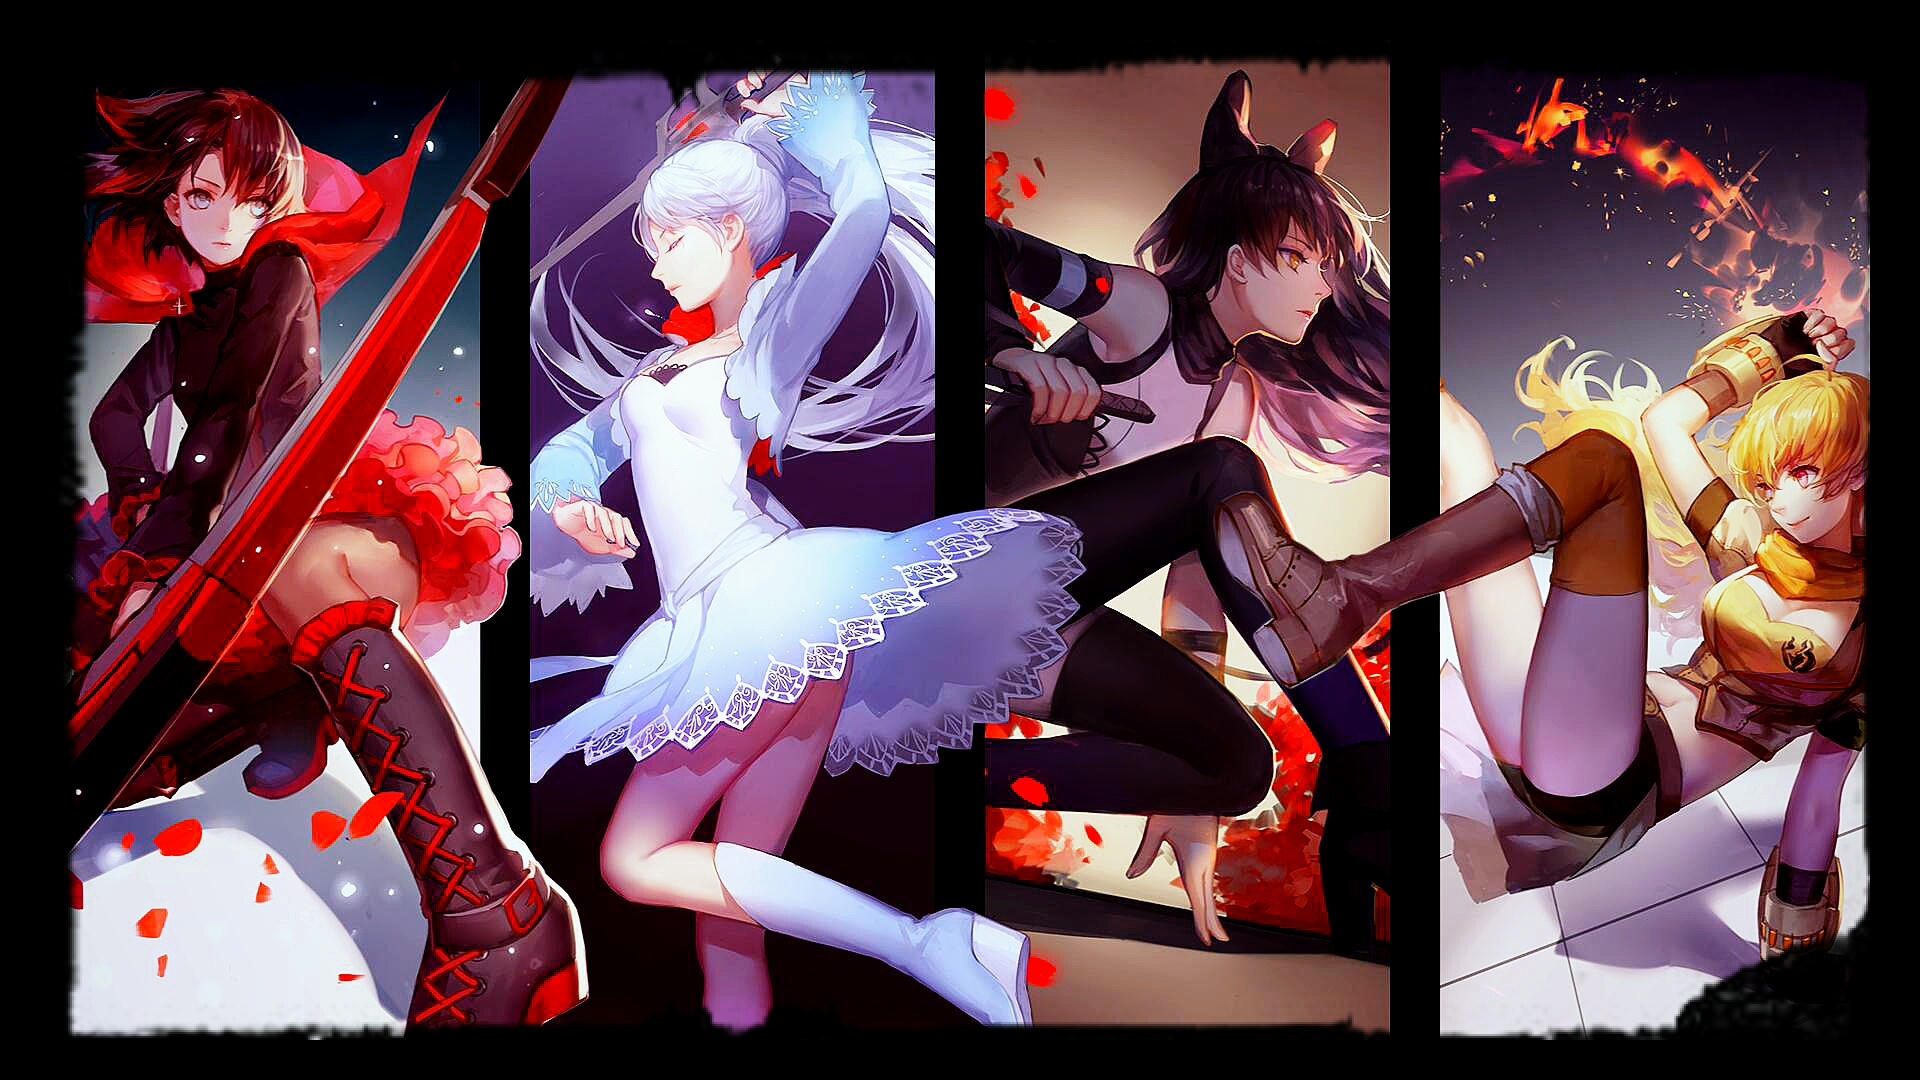 1920x1080 Wallpaper : black, anime girls, collage, red, white dress, yellow, Blake Belladonna, RWBY, panties, Ruby Rose character, Rooster Teeth, Yang Xiao Long, Weiss Schnee, musical theatre tienguan 357414 HD Wallpapers